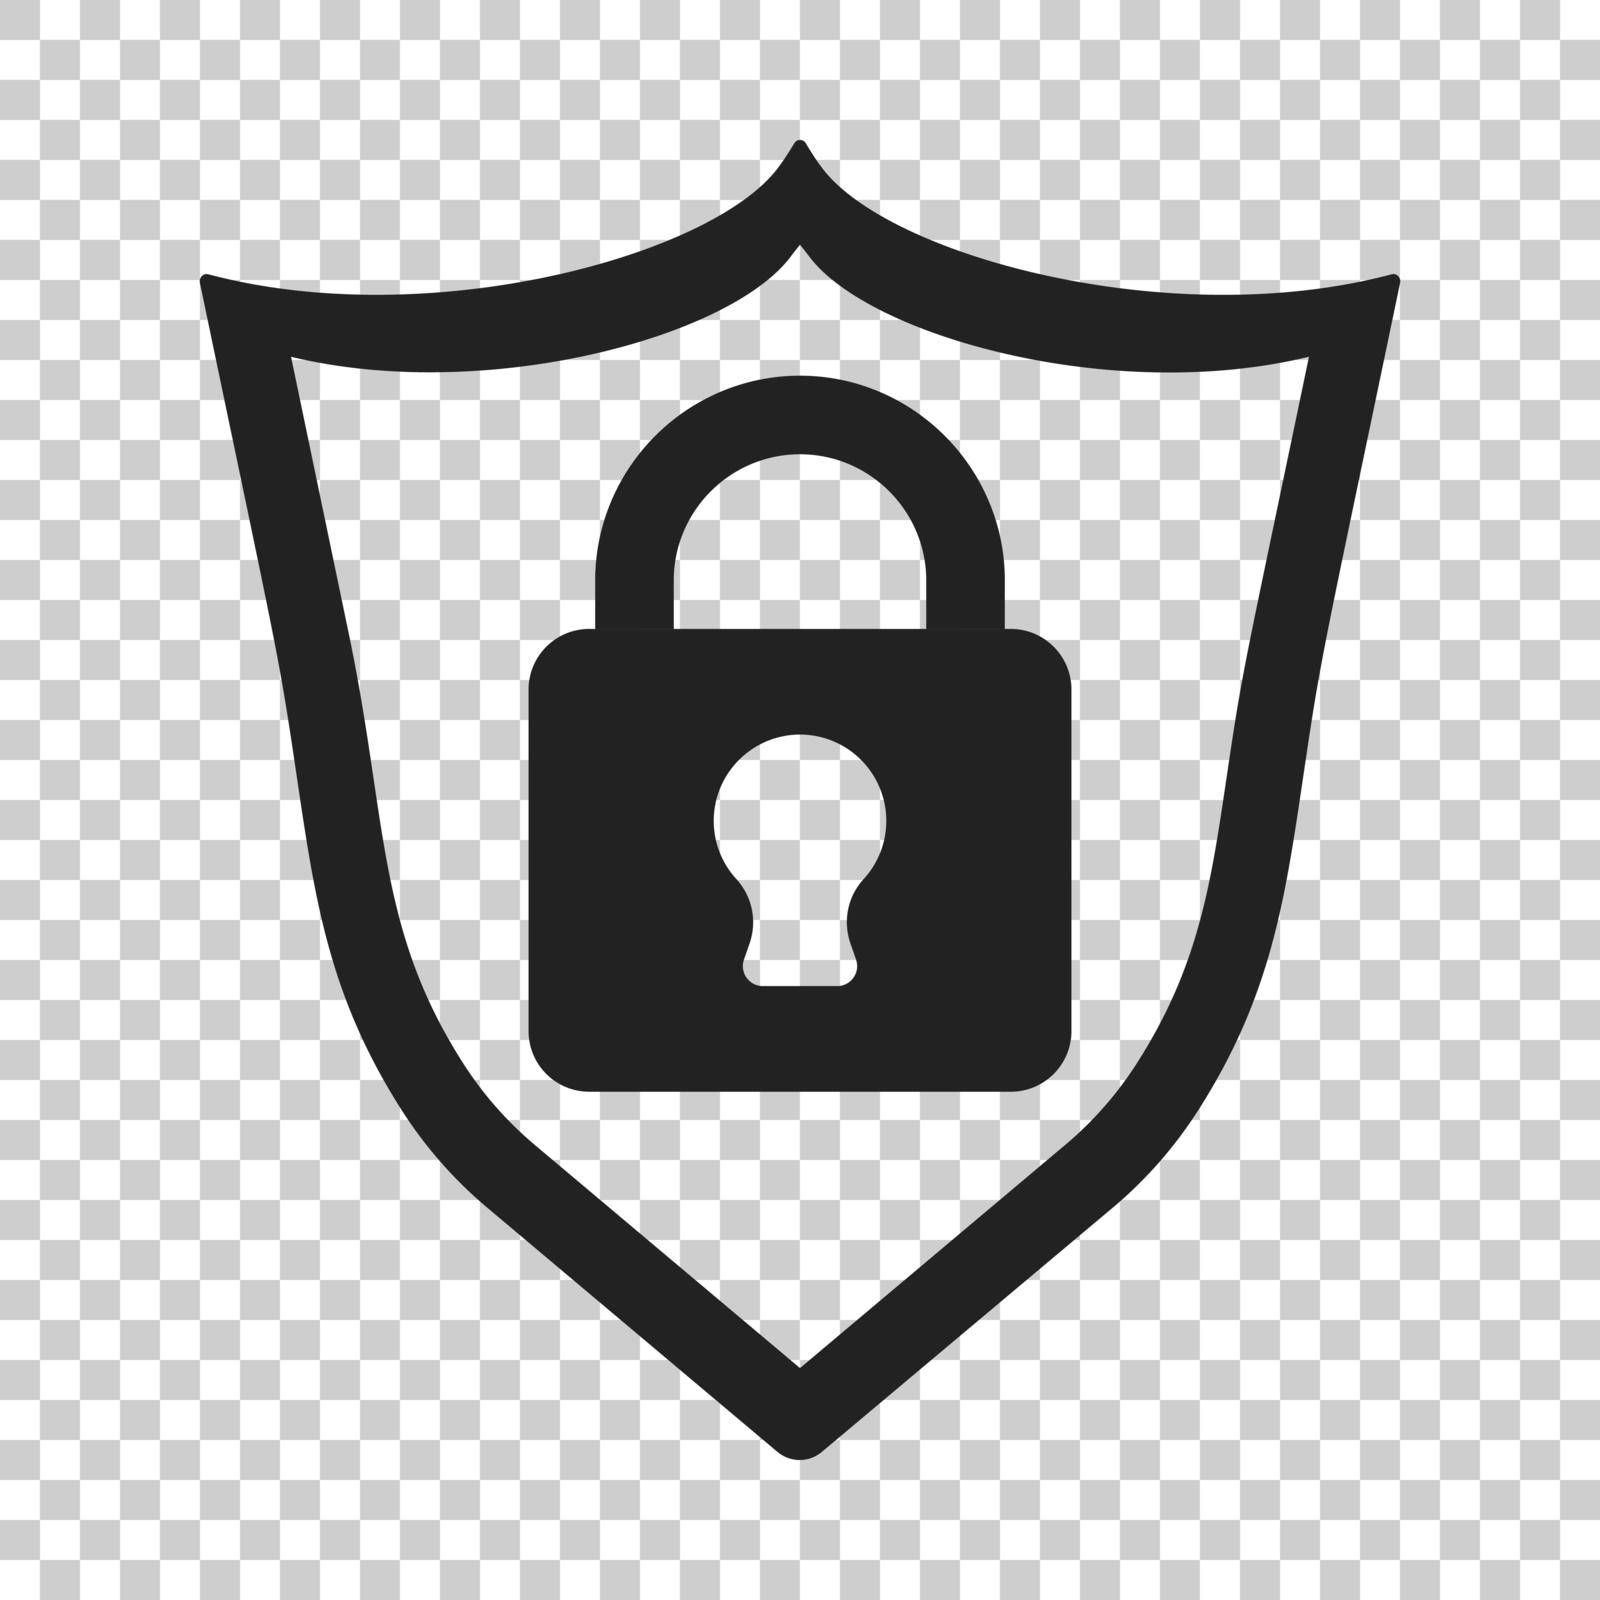 Lock with shield security icon. Vector illustration on isolated transparent background. Business concept padlock pictogram. by LysenkoA